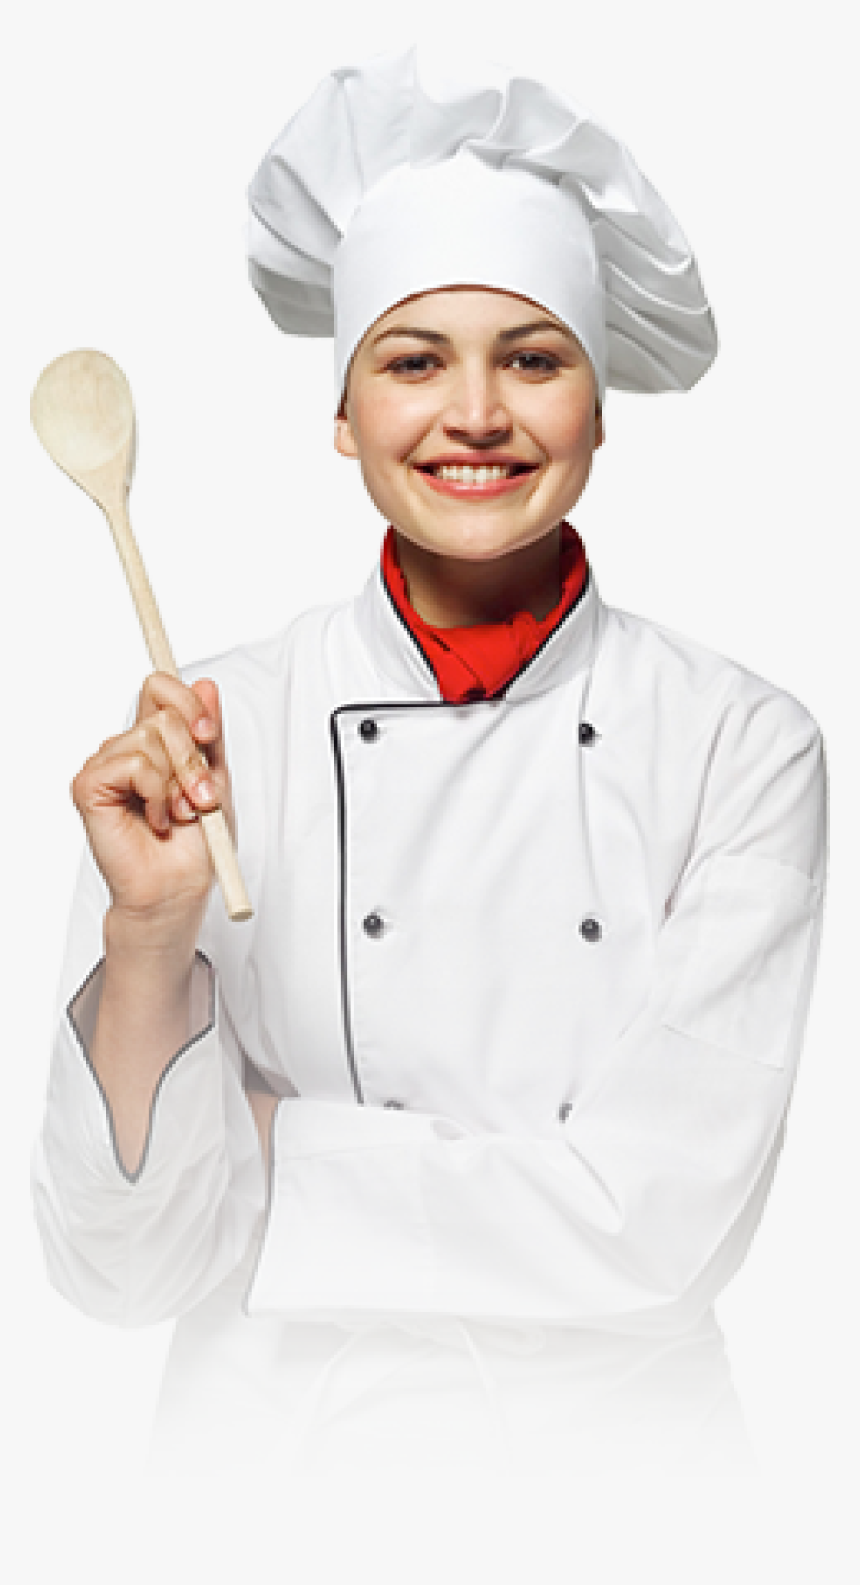 Chef Image - Chef Transparent, HD Png Download, Free Download